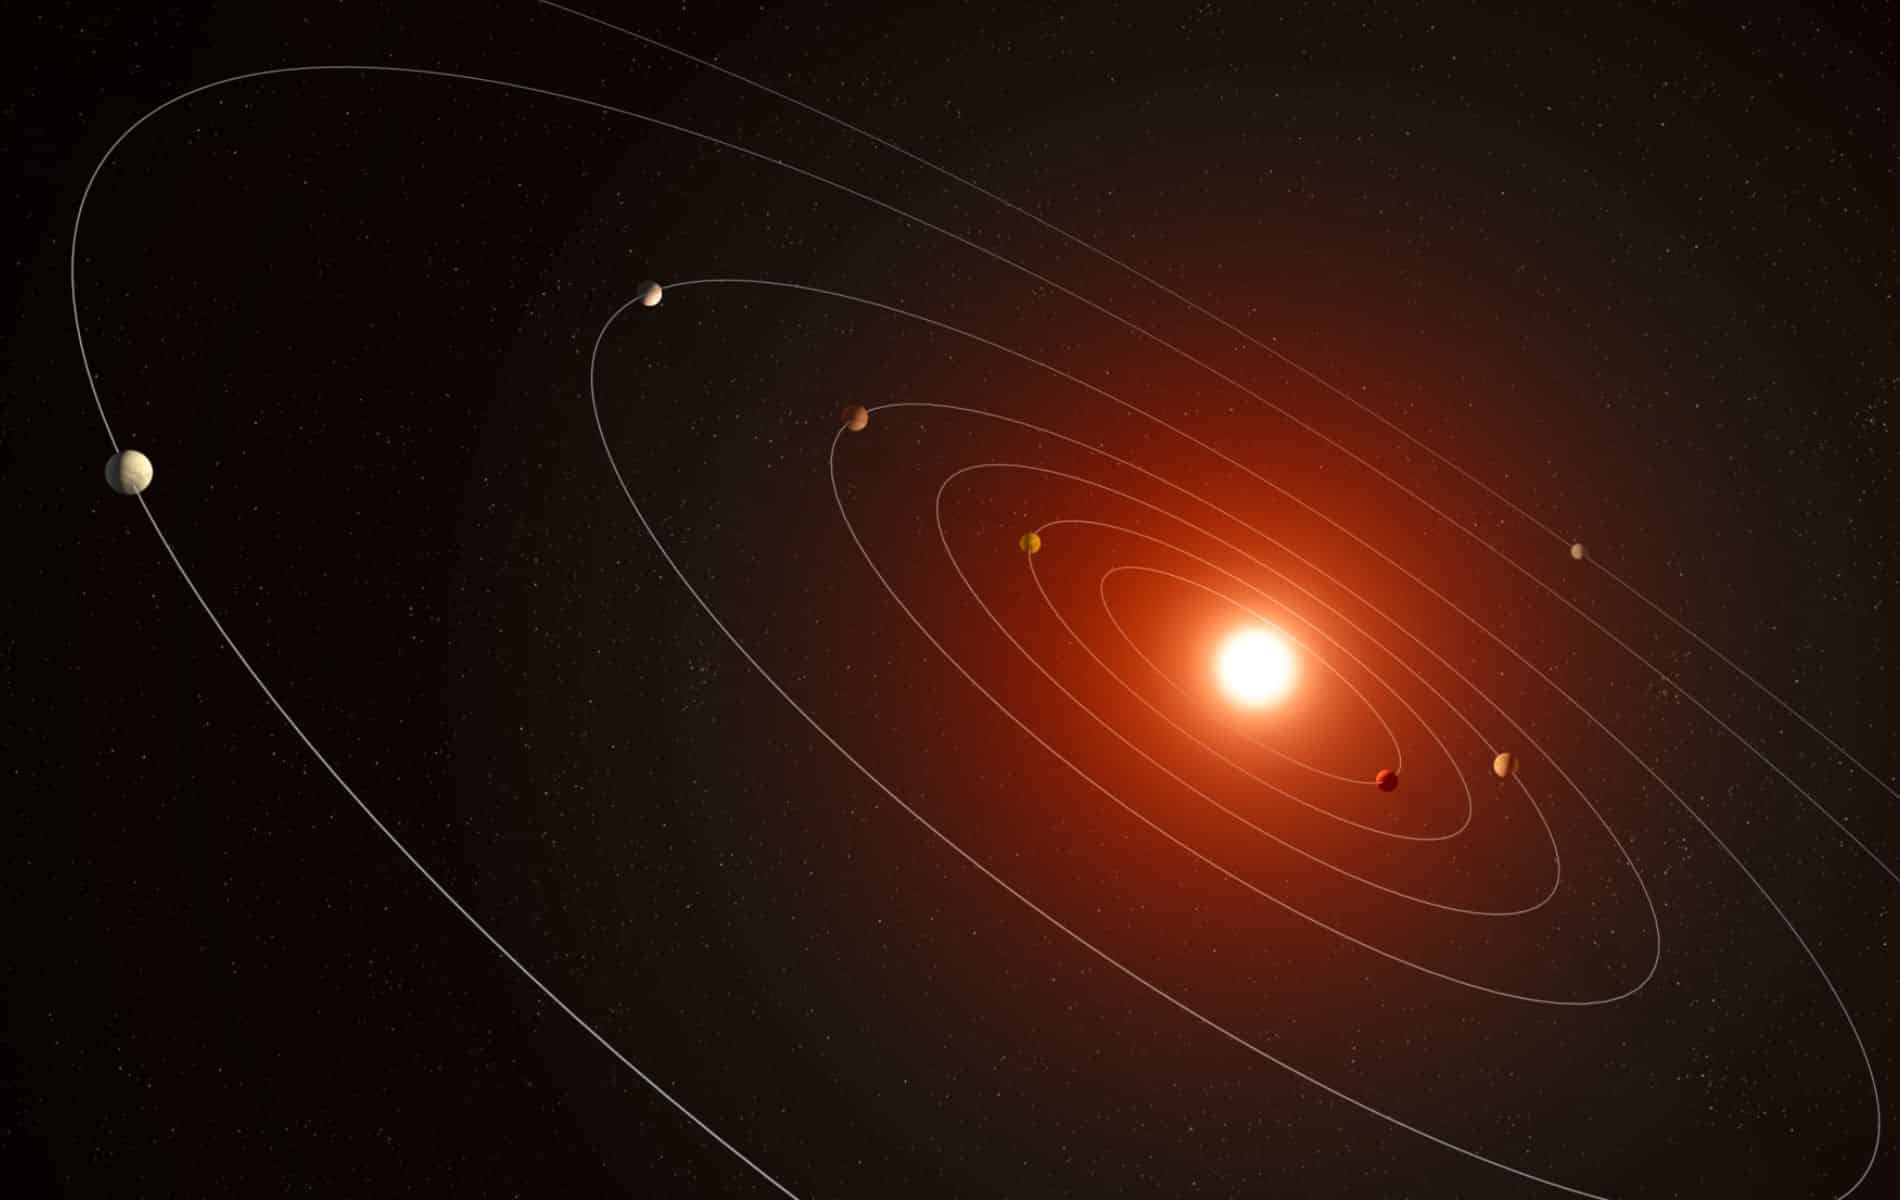 A star with seven red hot planets has been discovered in data from a retired space telescope